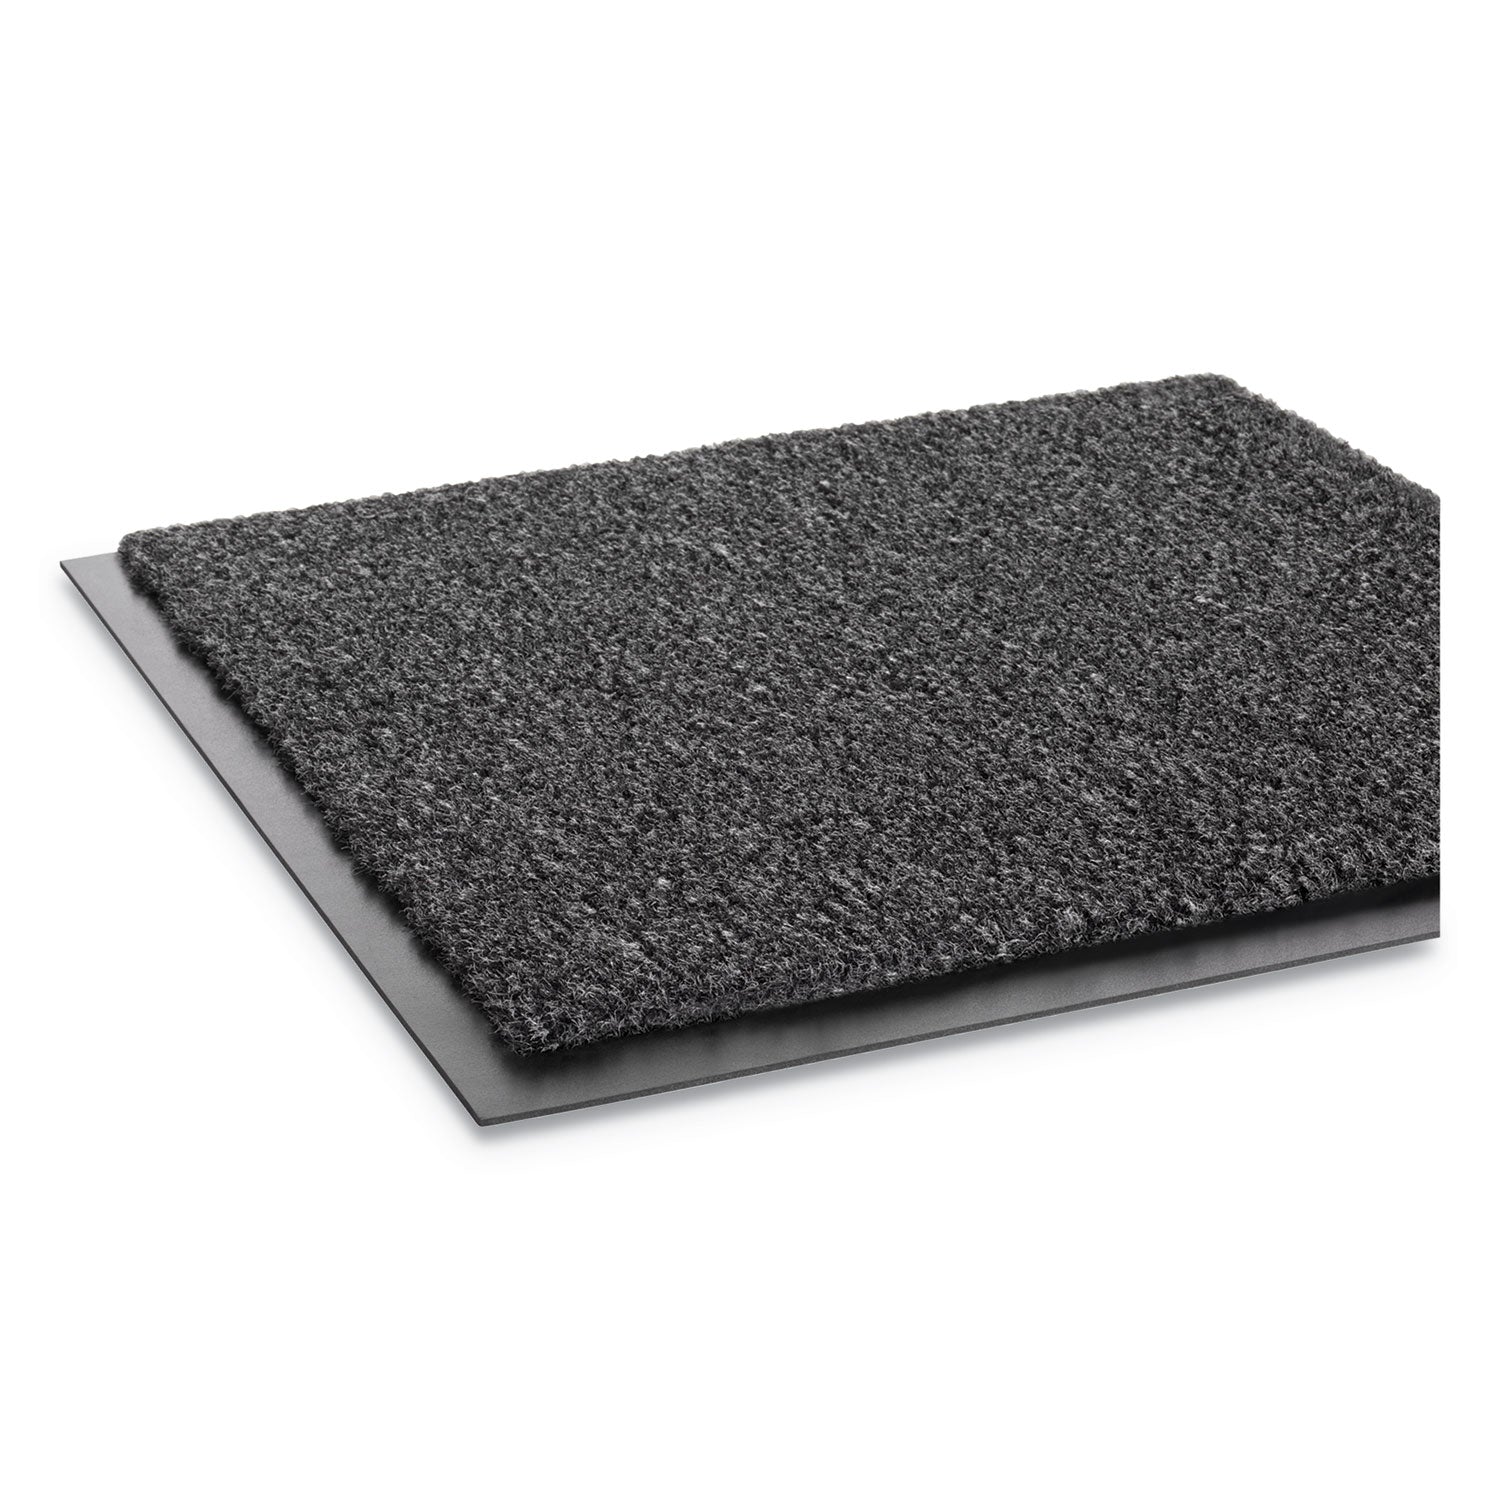 Rely-On Olefin Indoor Wiper Mat, 36 x 48, Charcoal - 2